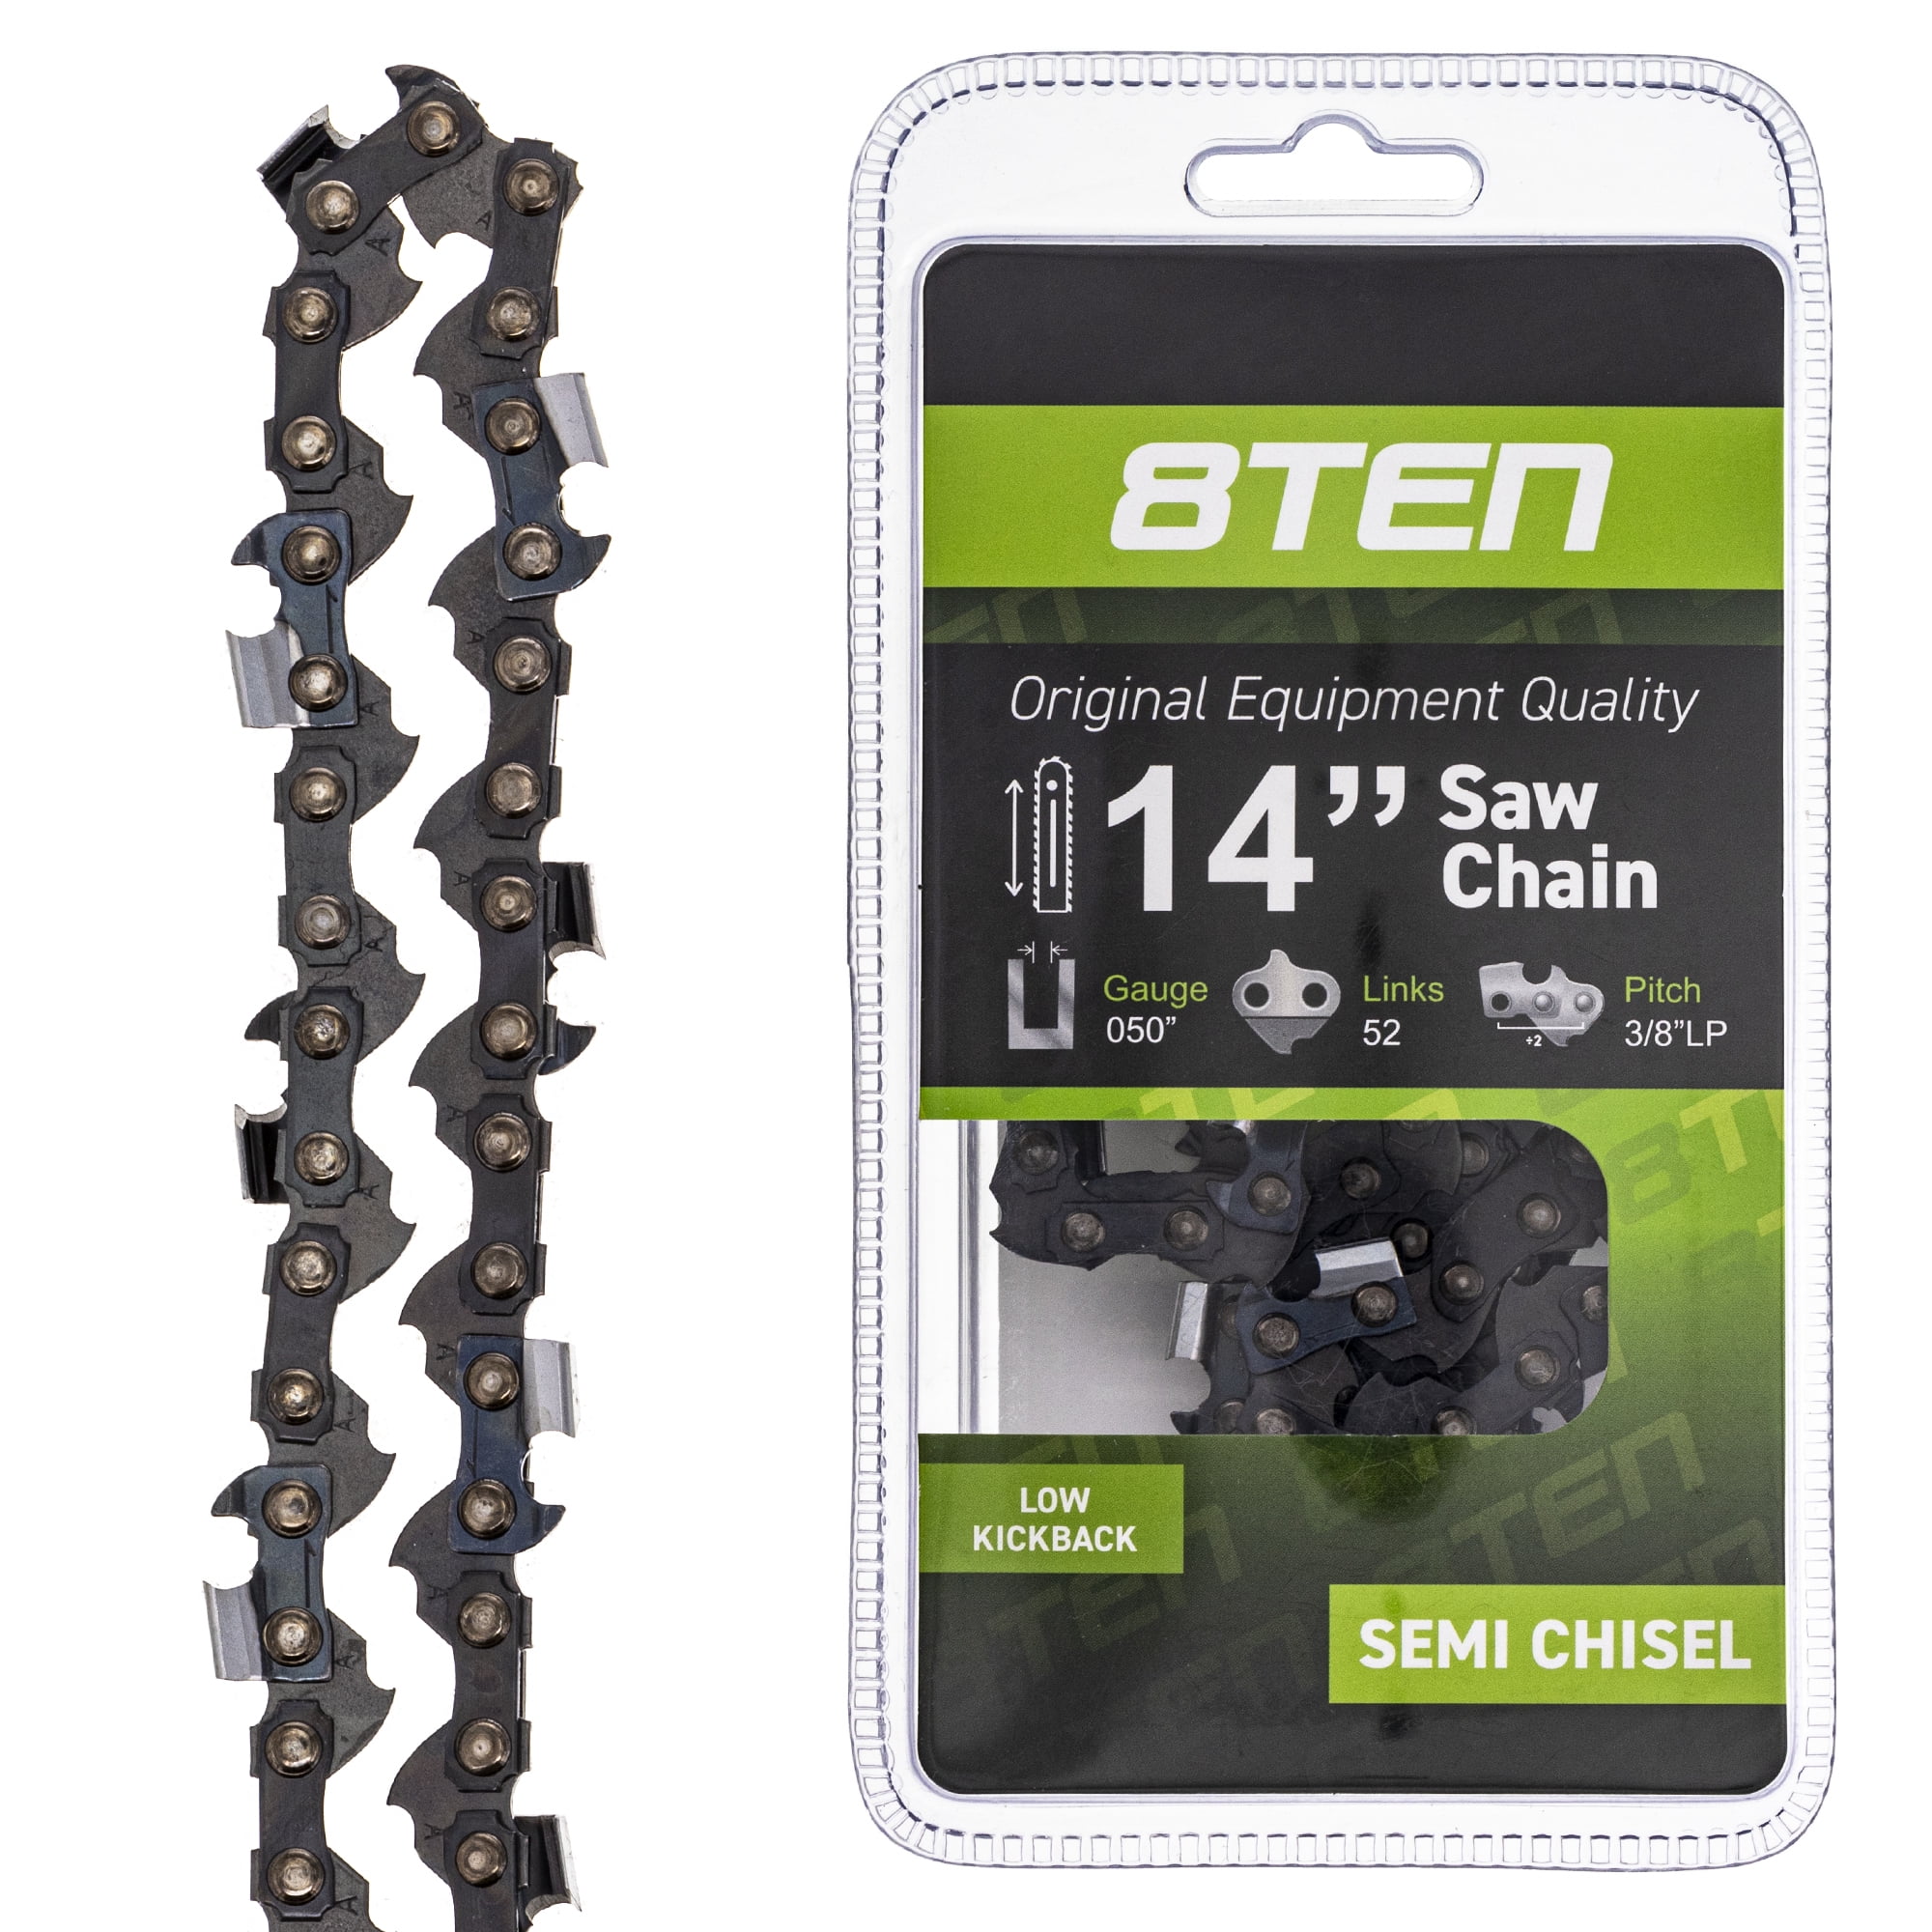 AUTOKAY 18-Inch Chainsaw Chain for Echo Poulan Craftsman Gauge